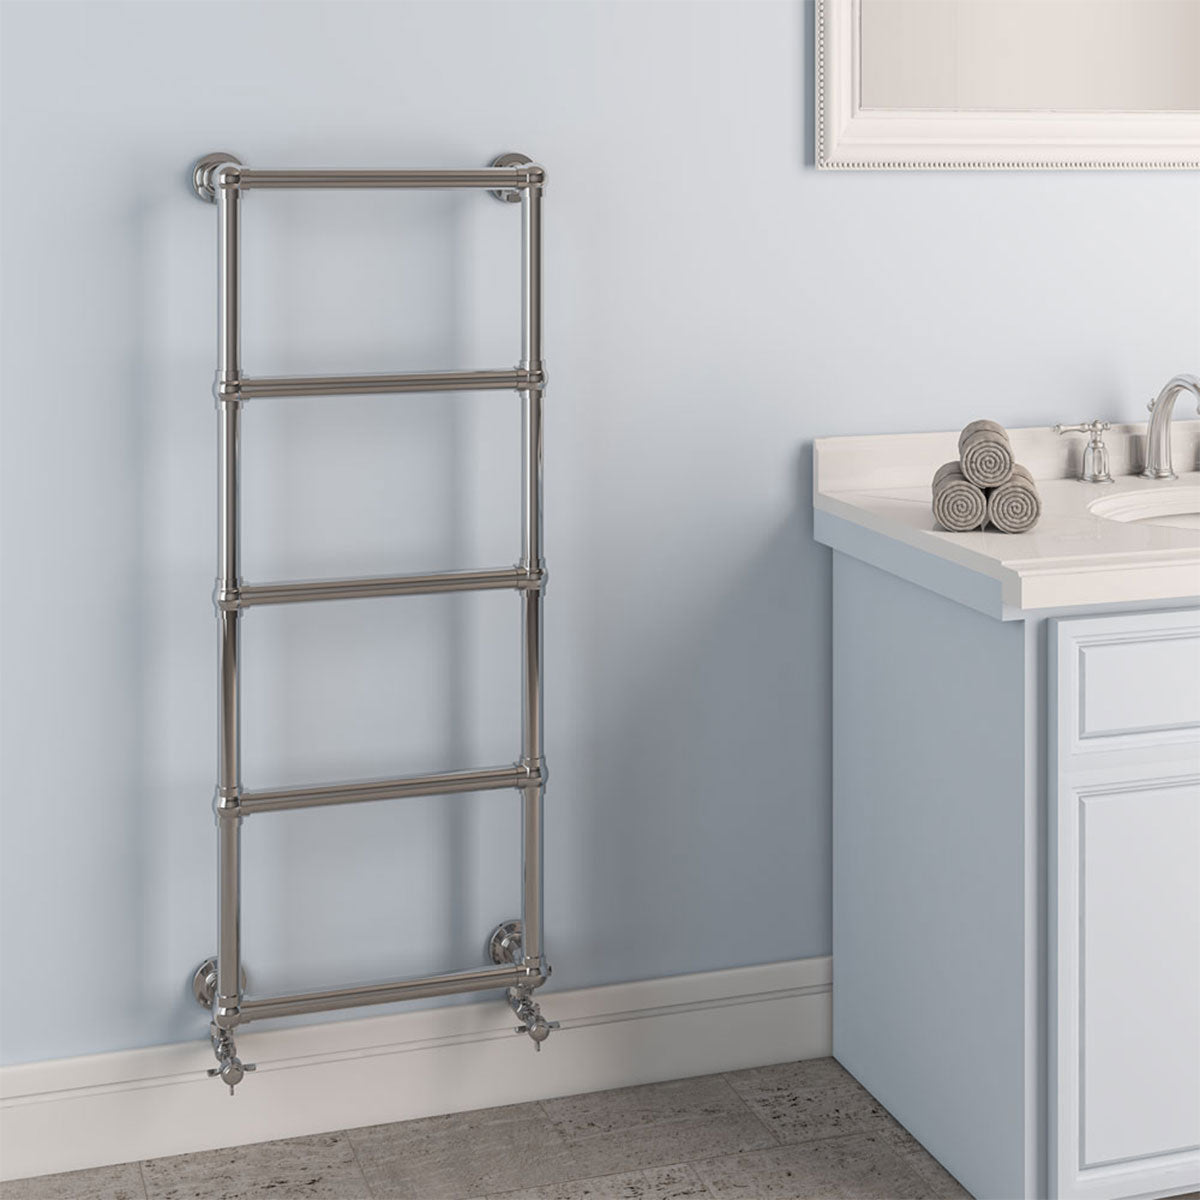 Stour Traditional Heated Towel Rail Chrome Feature